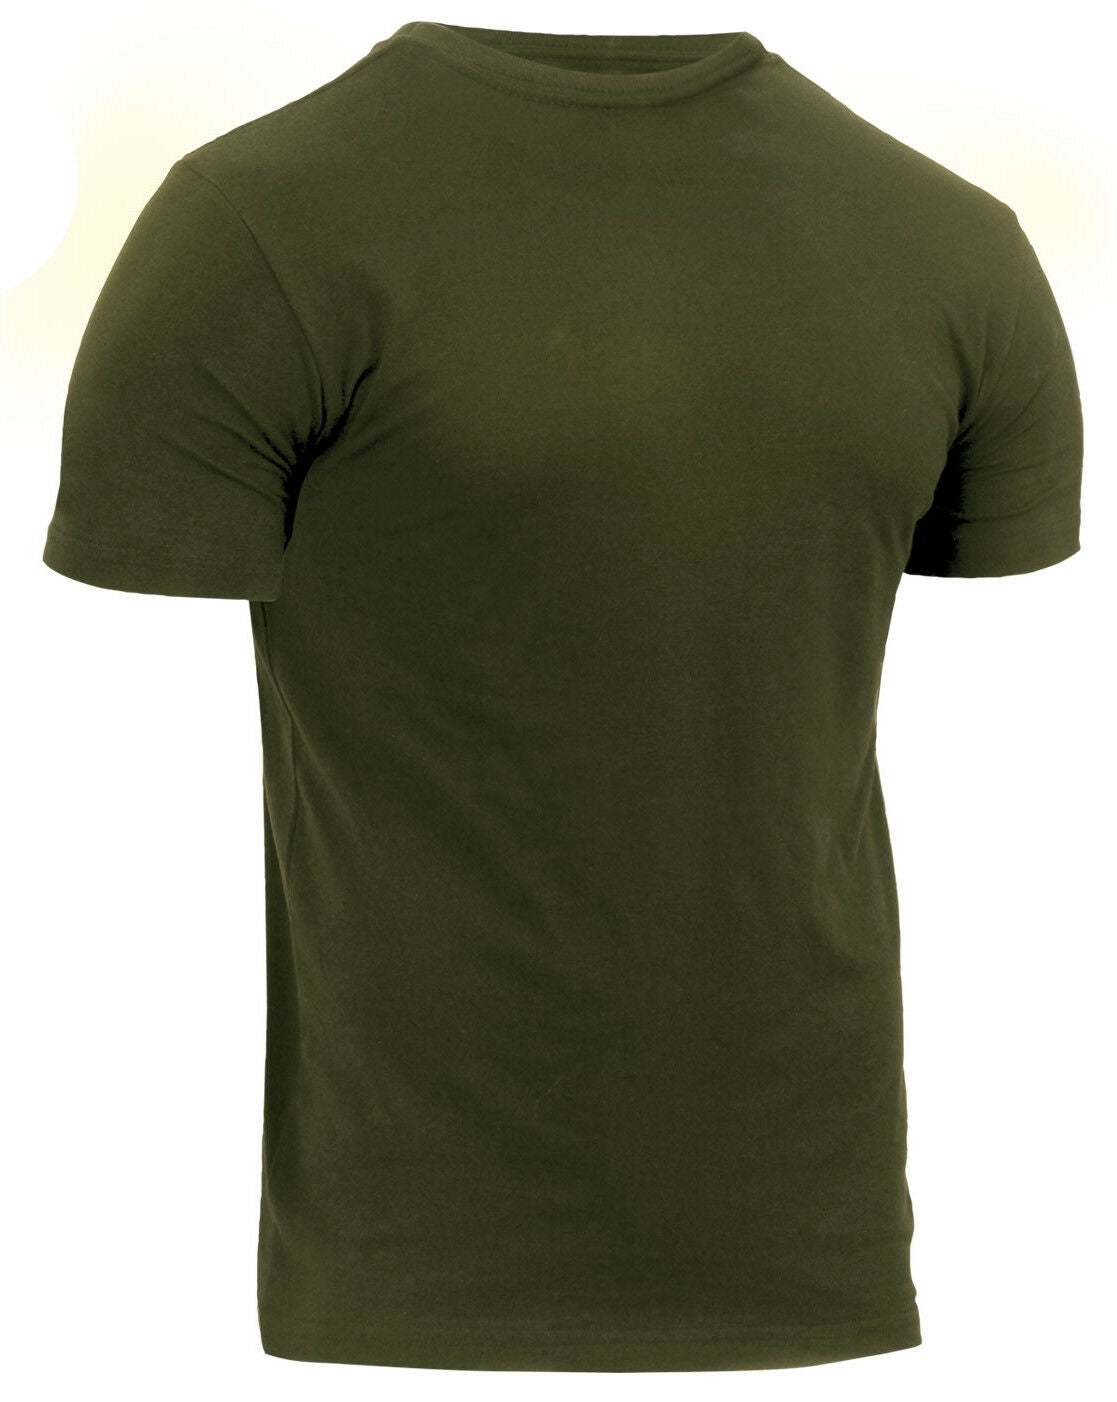 Rothco Athletic Fit Solid Color Military T-Shirt - Olive Drab